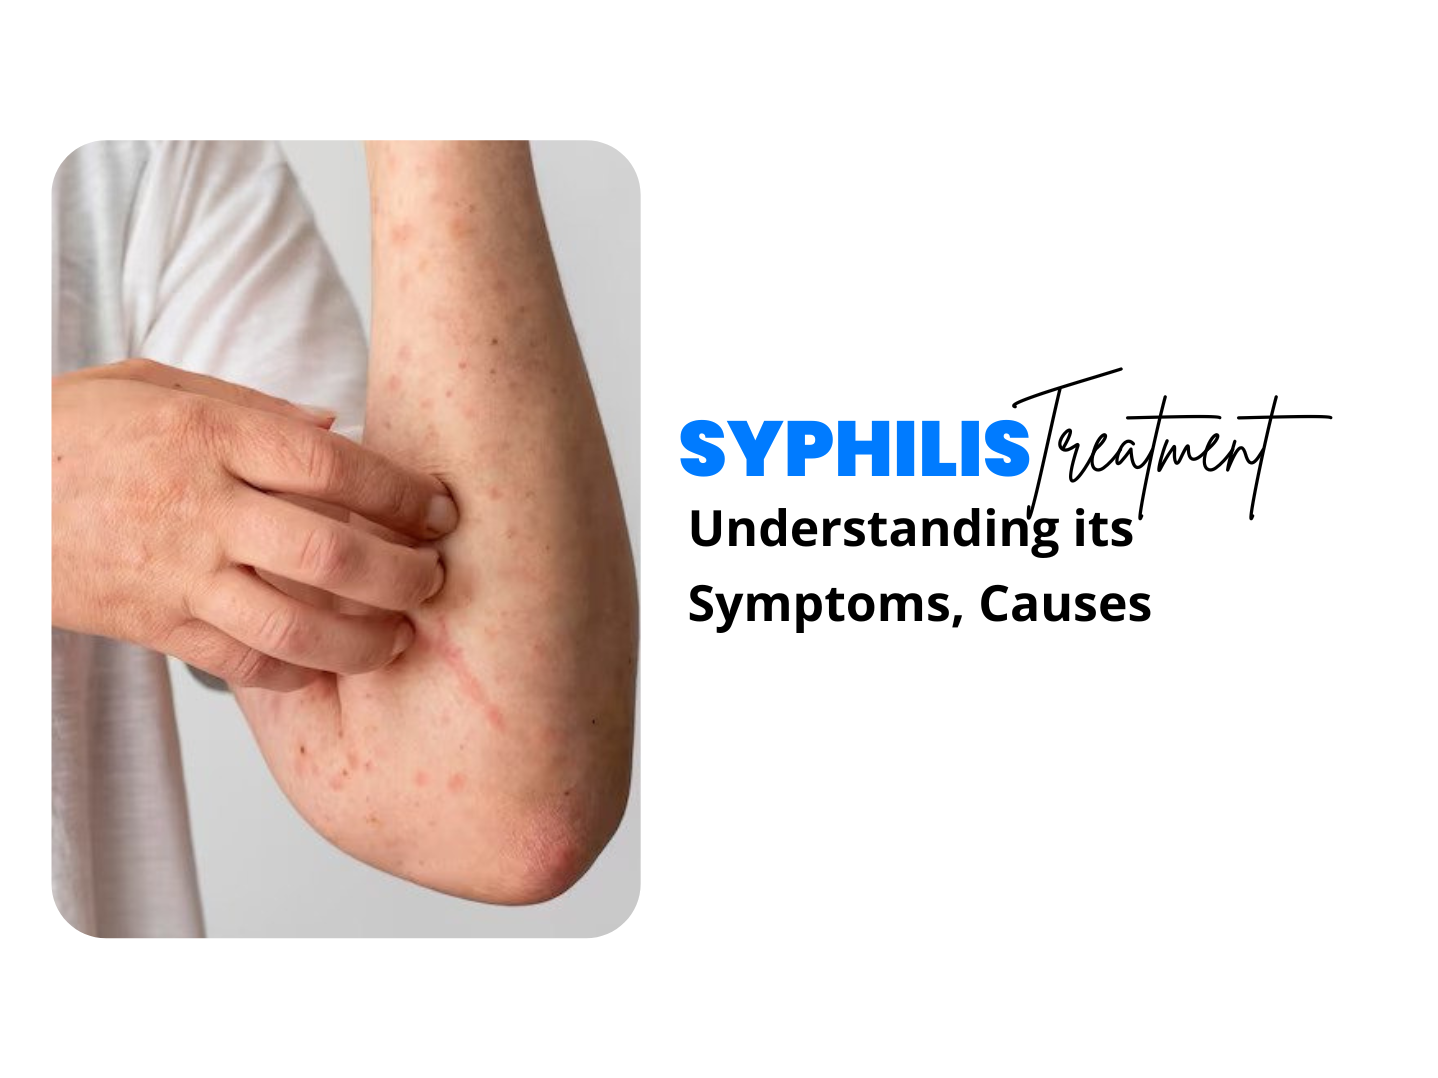 SYPHILIS yuifriif

Understanding its
Symptoms, Causes